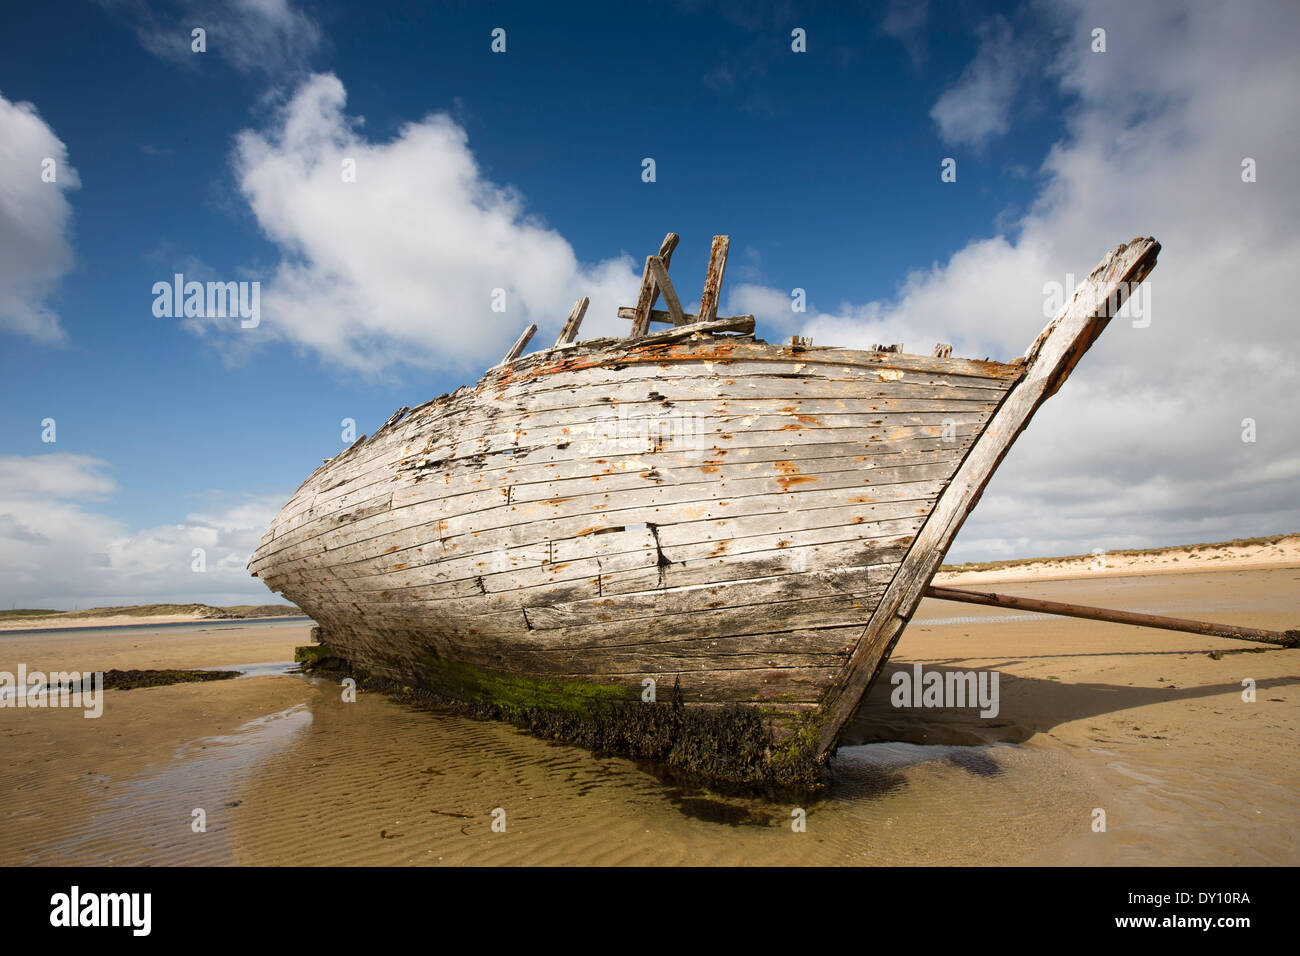 Ireland, Co Donegal, Gweedore, Bunbeg, Bad Eddies boat wreck on Maherclogher beach Stock Photo